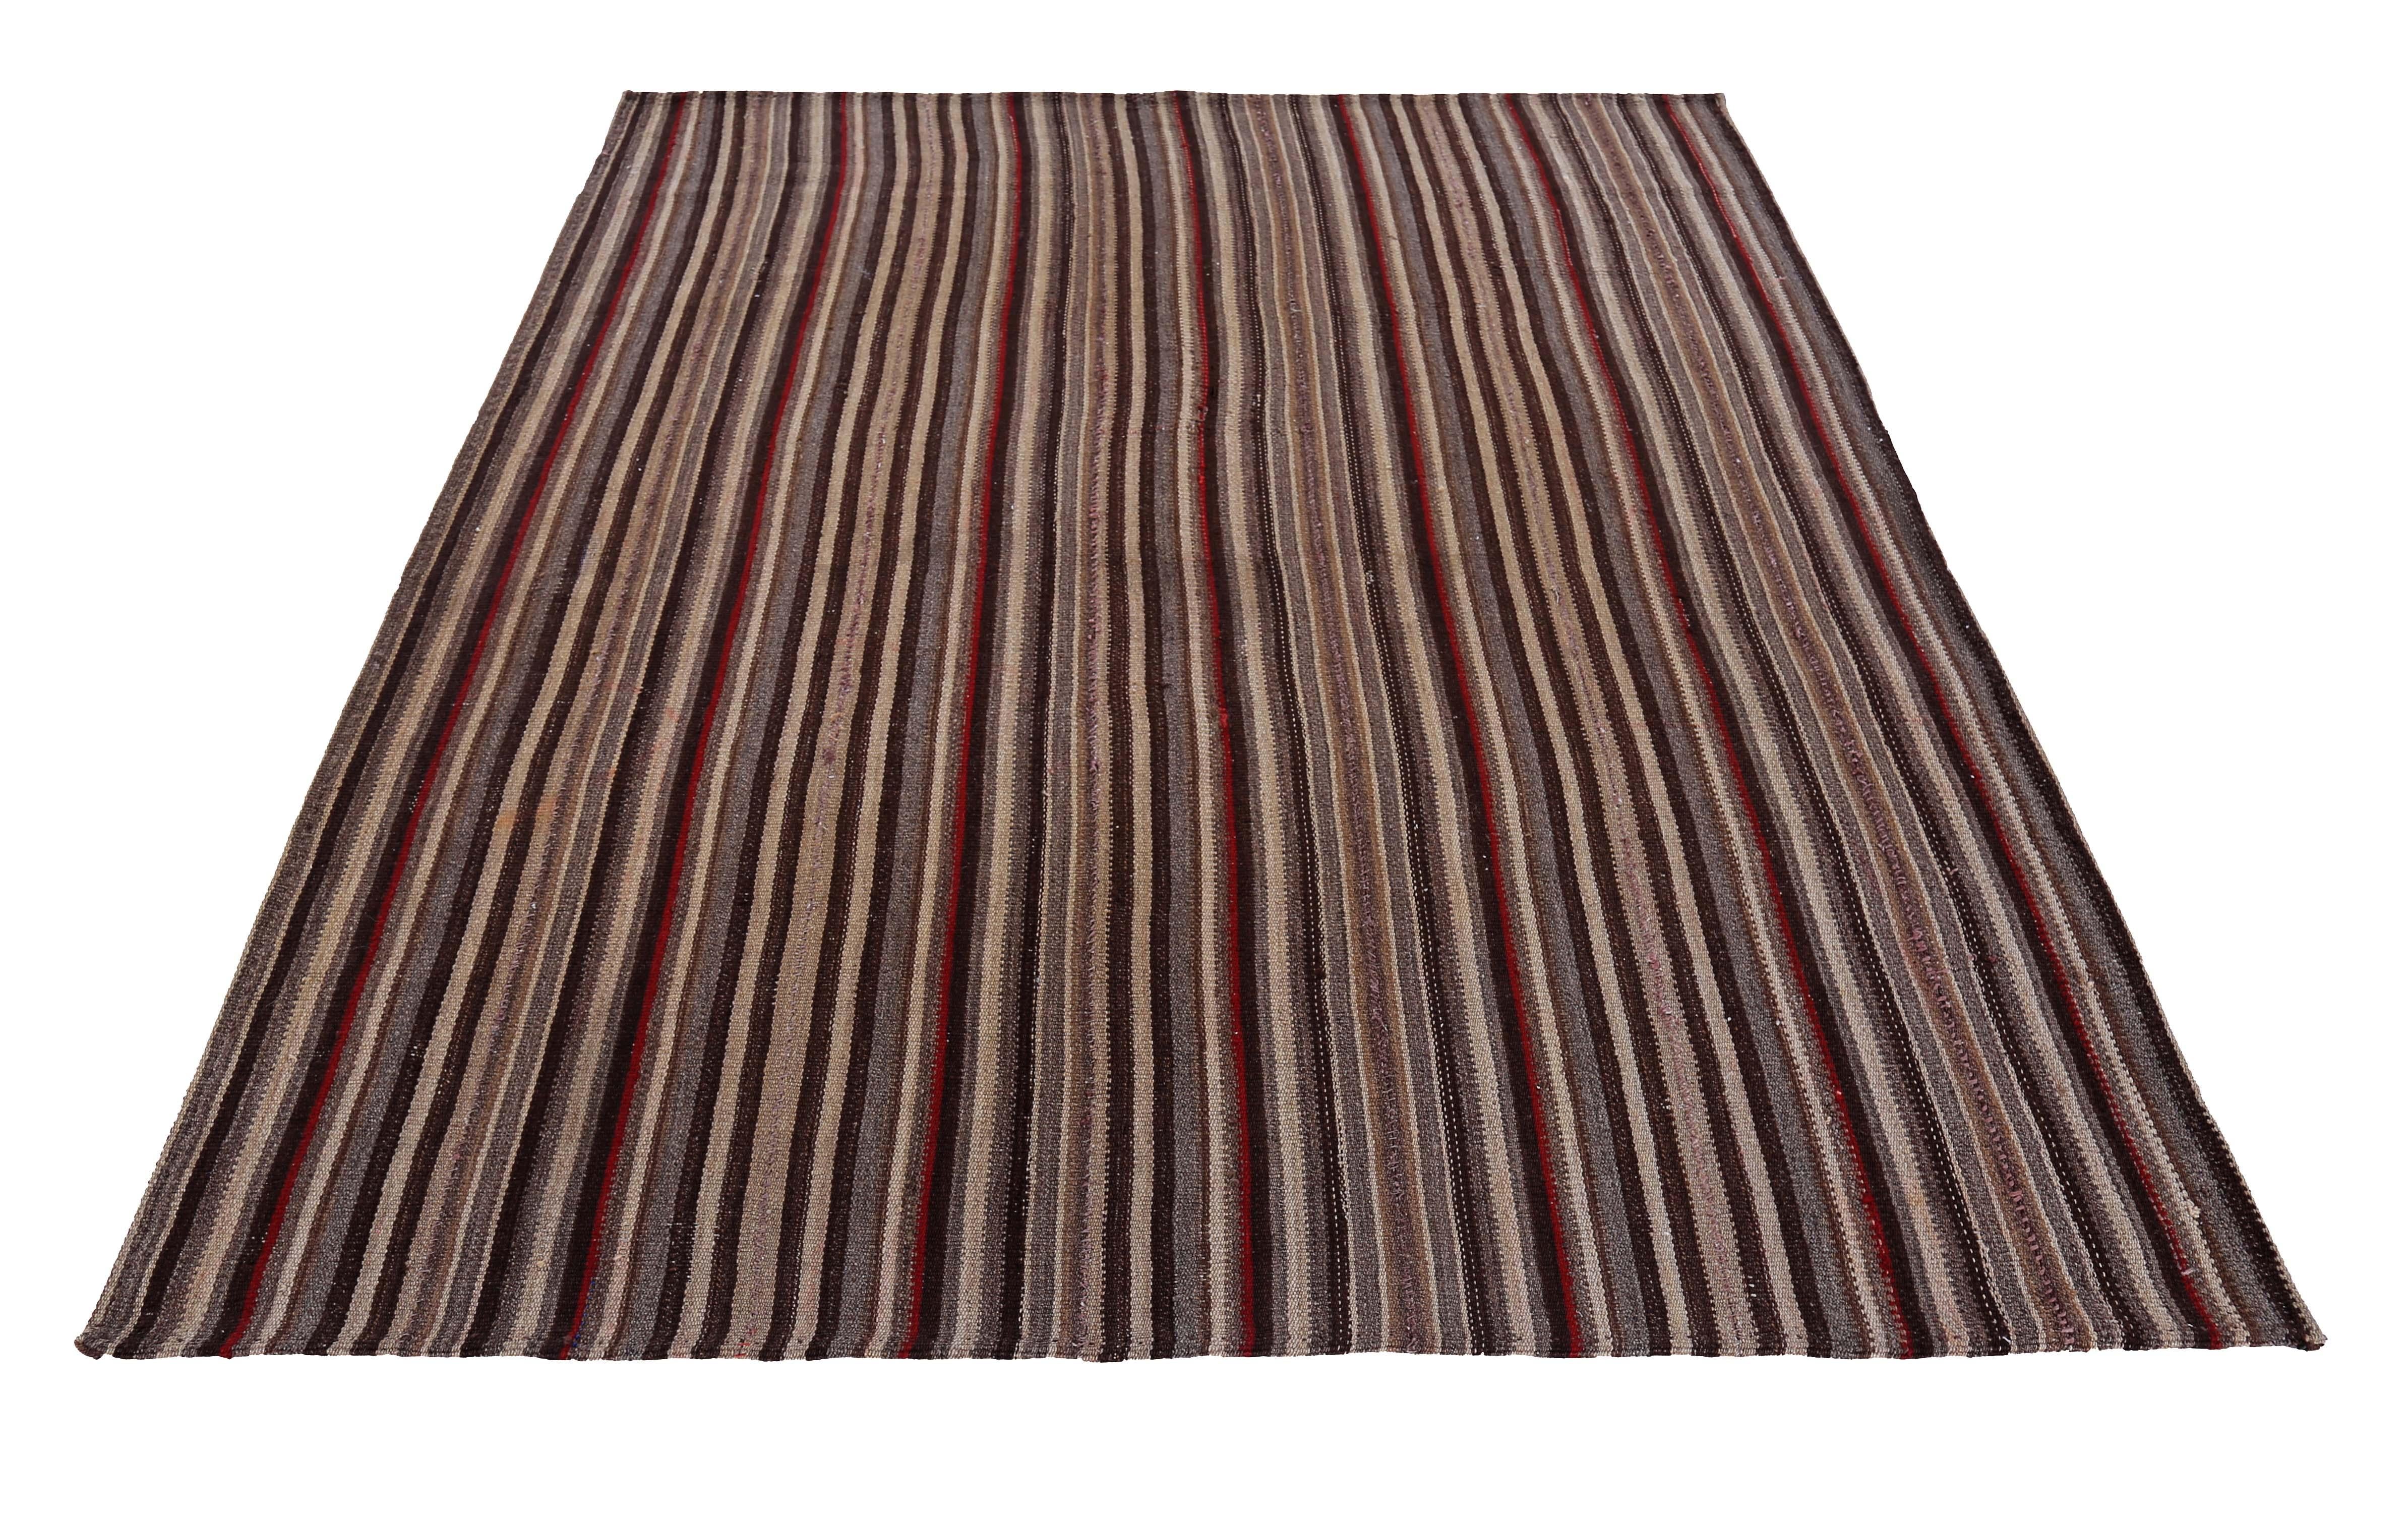 Modern Turkish rug handwoven from the finest sheep’s wool and colored with all-natural vegetable dyes that are safe for humans and pets. It’s a traditional Kilim flat-weave design featuring red, brown and beige stripes. It’s a stunning piece to get